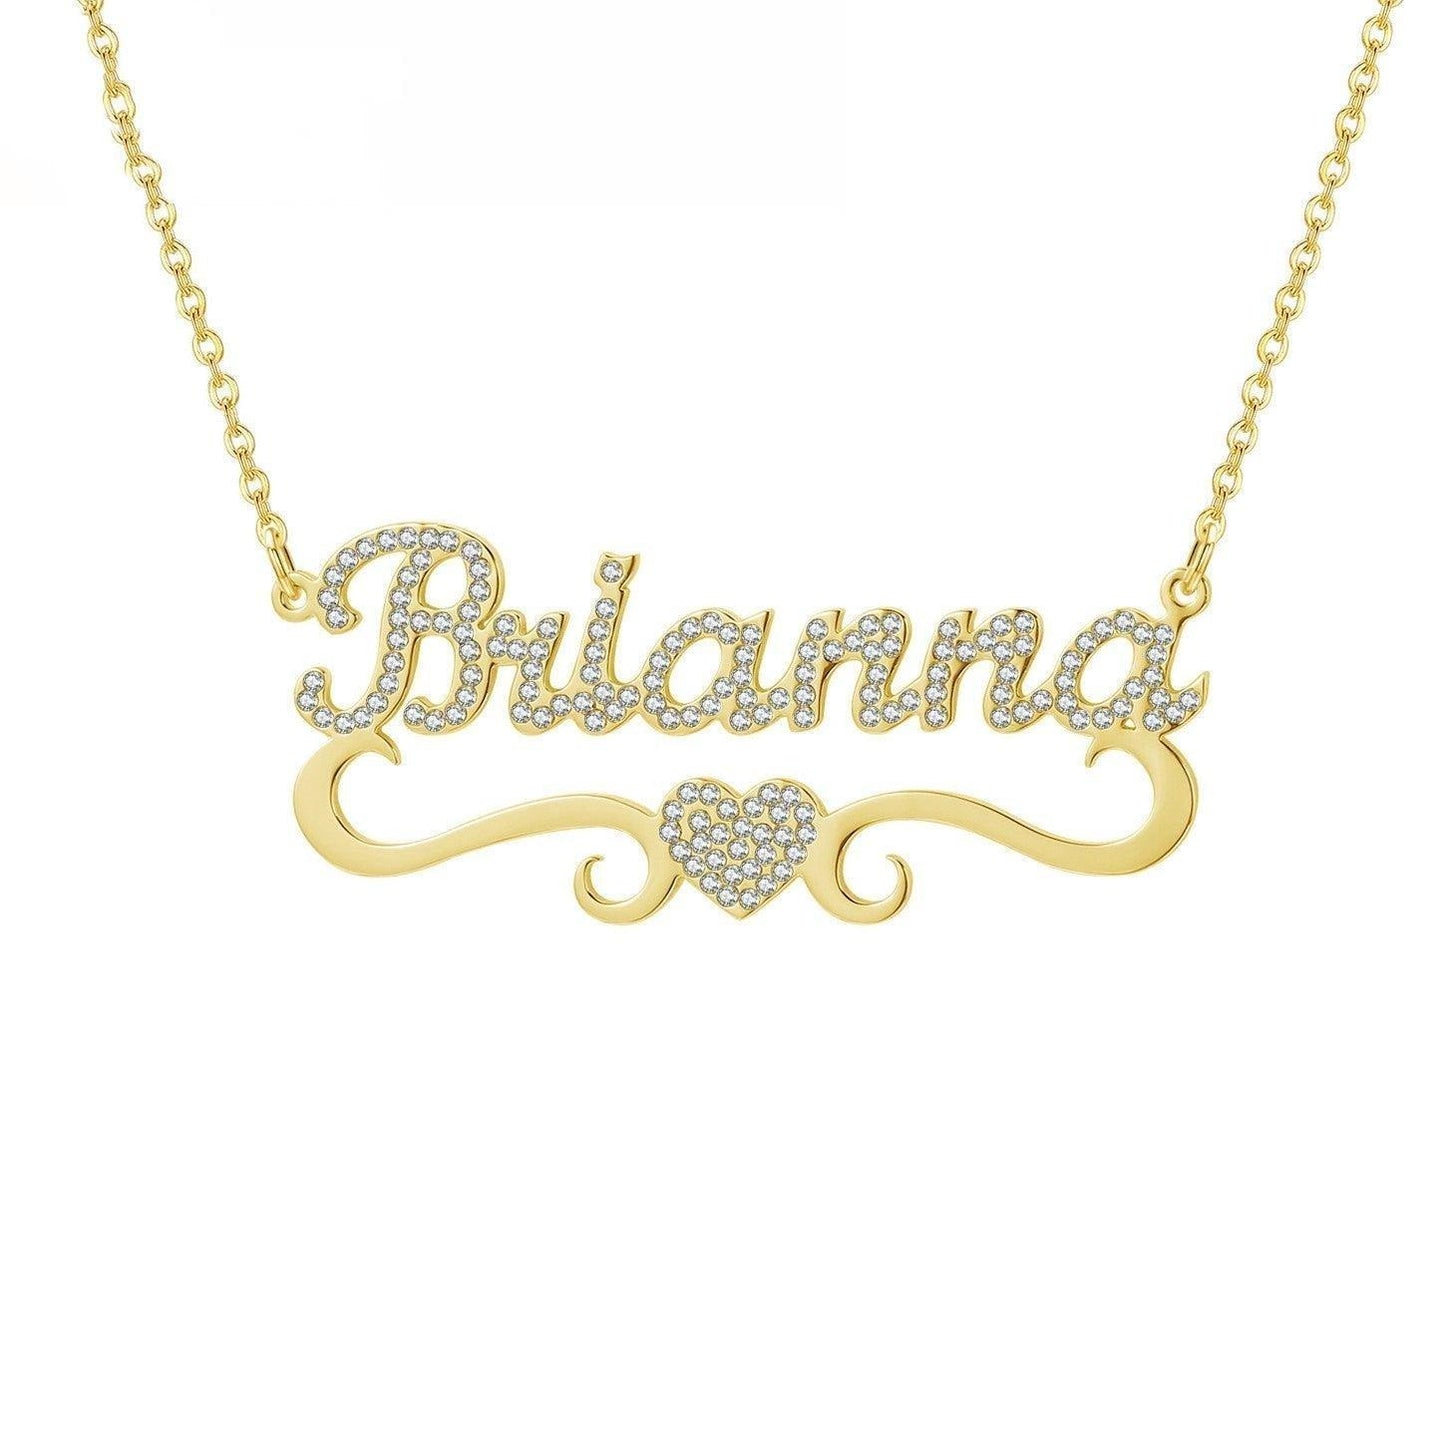 Personalized Heart Iced Out Name Necklace in 2023 | Personalized Heart Iced Out Name Necklace - undefined | Custom Name Necklace Personalized Necklace, DIY Personalized Custom Diamond, necklace, Necklaces, other necklace, Personalized Birthstone Heart-shaped Name Necklaces, Personalized Custom Diamond Necklaces, Personalized Custom Heart-shaped Letter Necklace, Personalized Fingerprint Necklace, Personalized gift | From Hunny Life | hunnylife.com